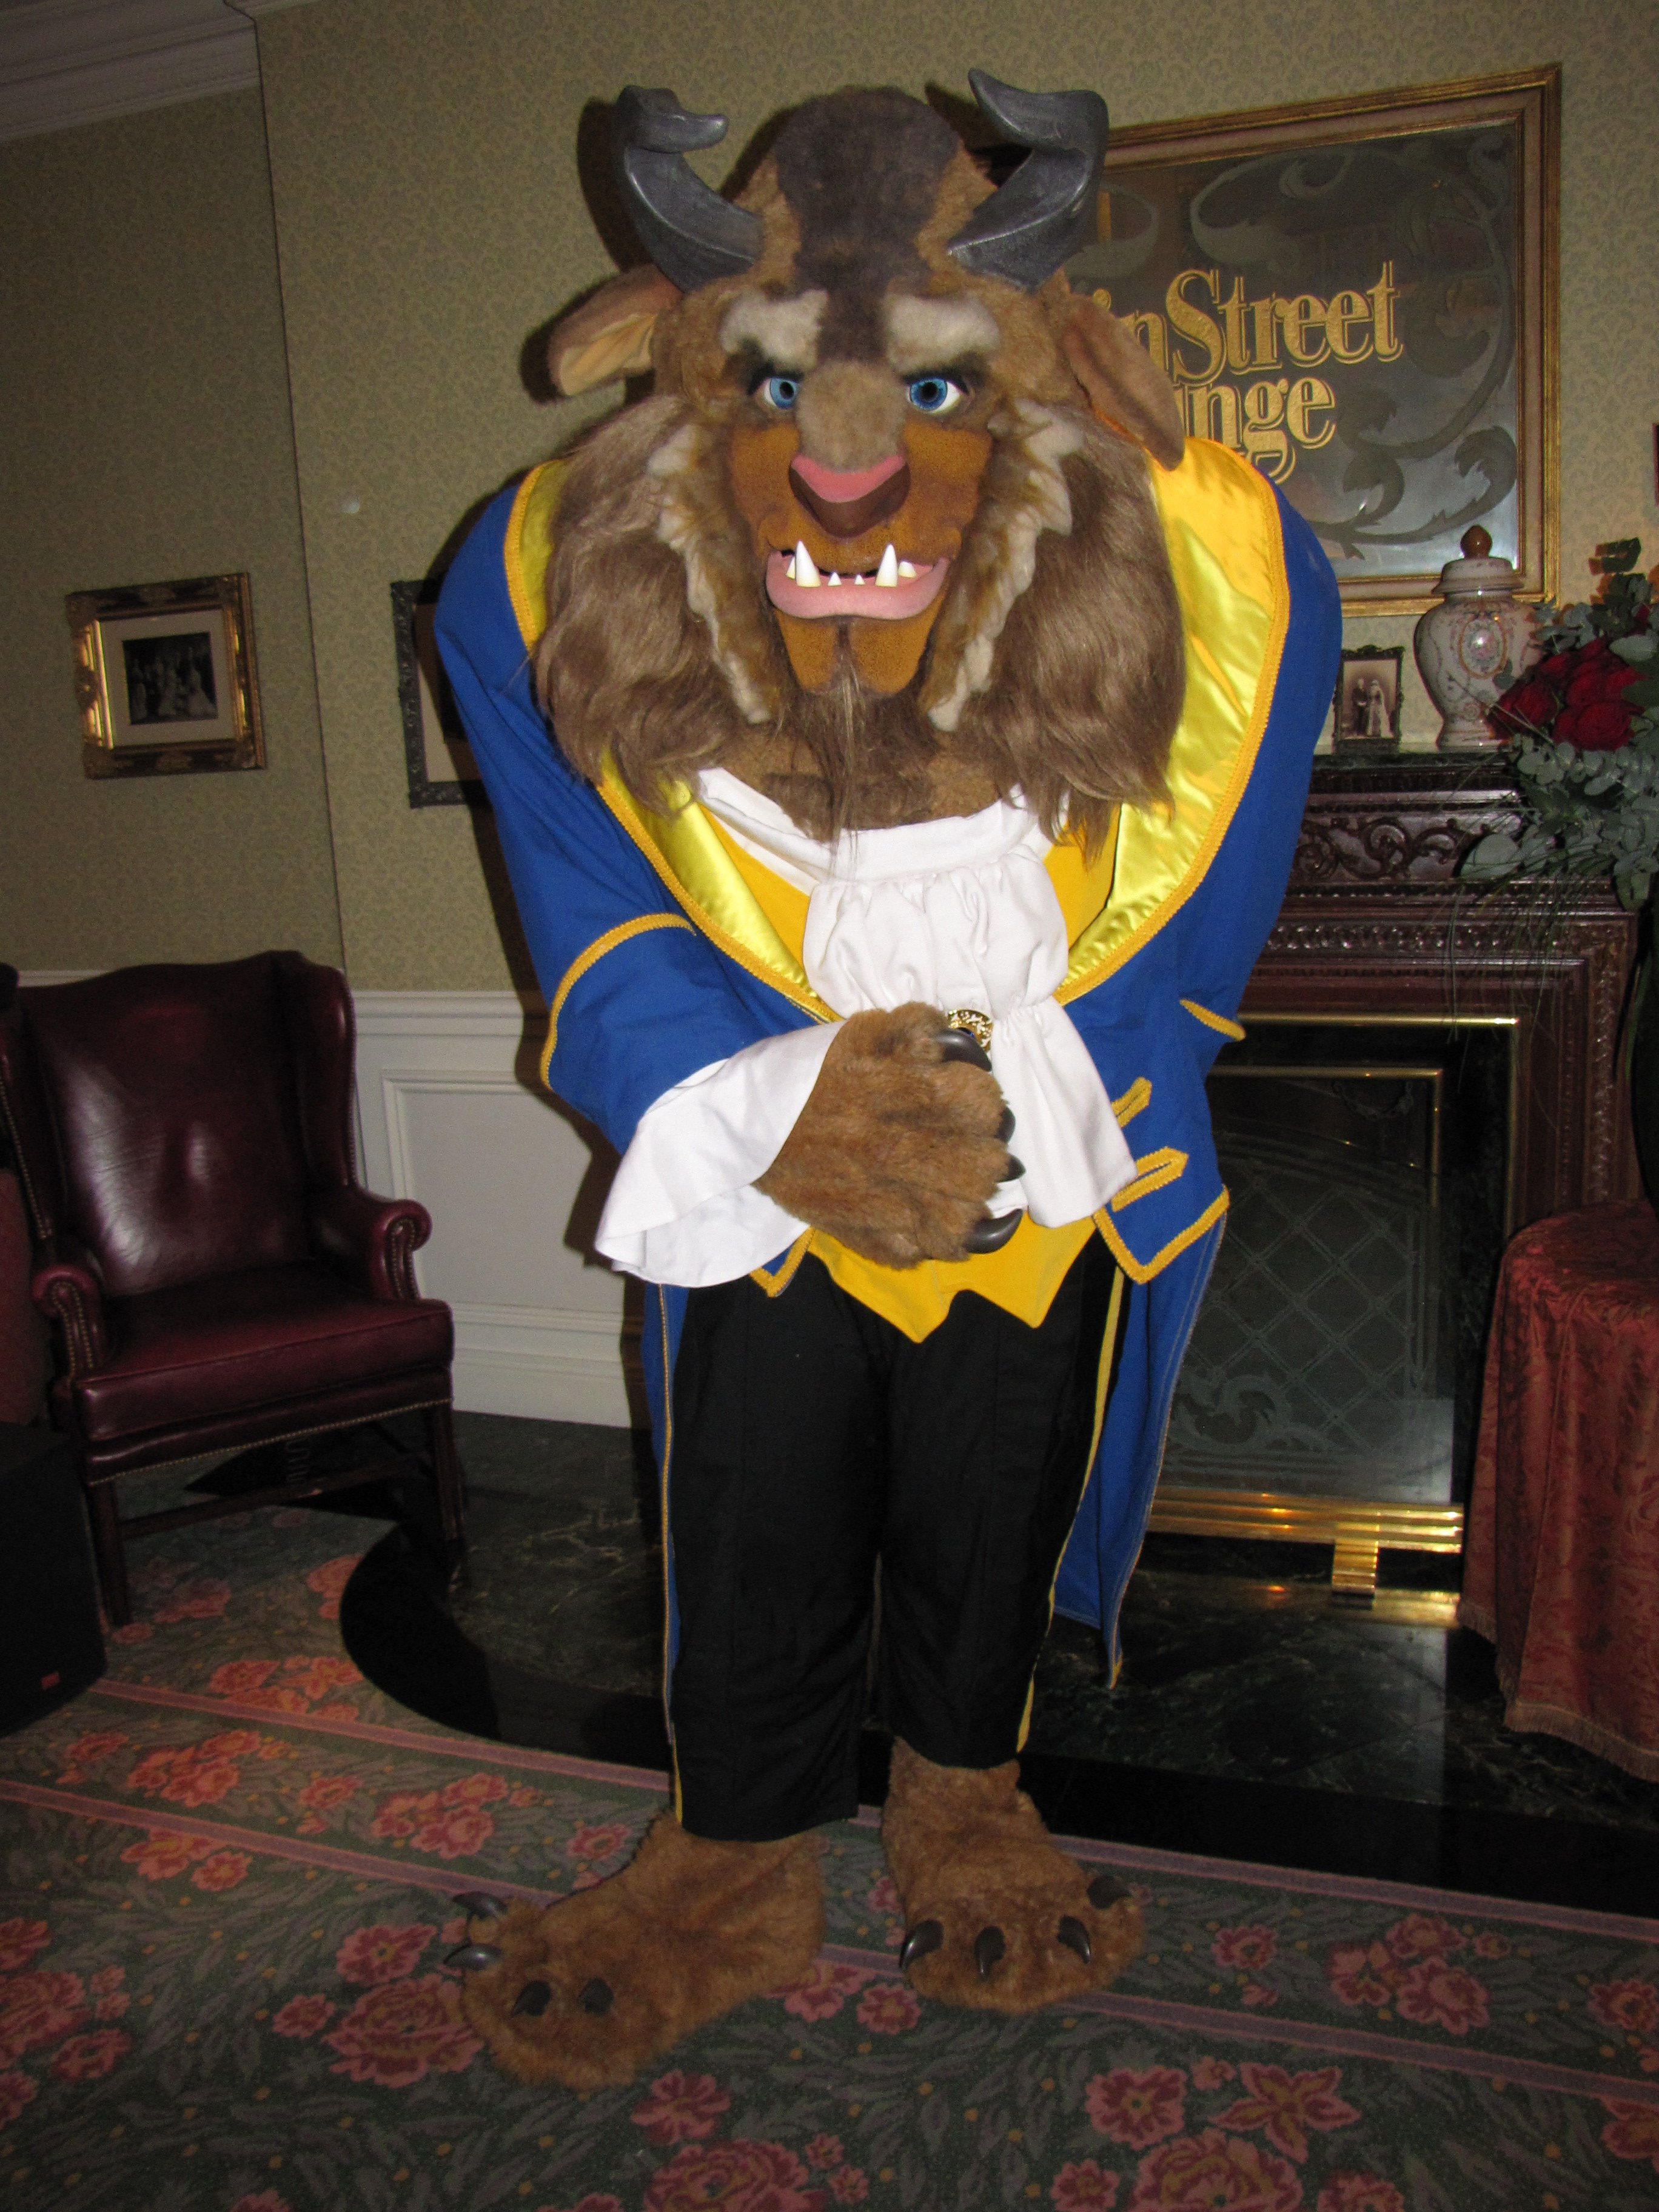 The Beast in his ball outfit during a special Meet'n'Greet at the Disneyland Hotel during Valentin's Day 2010.